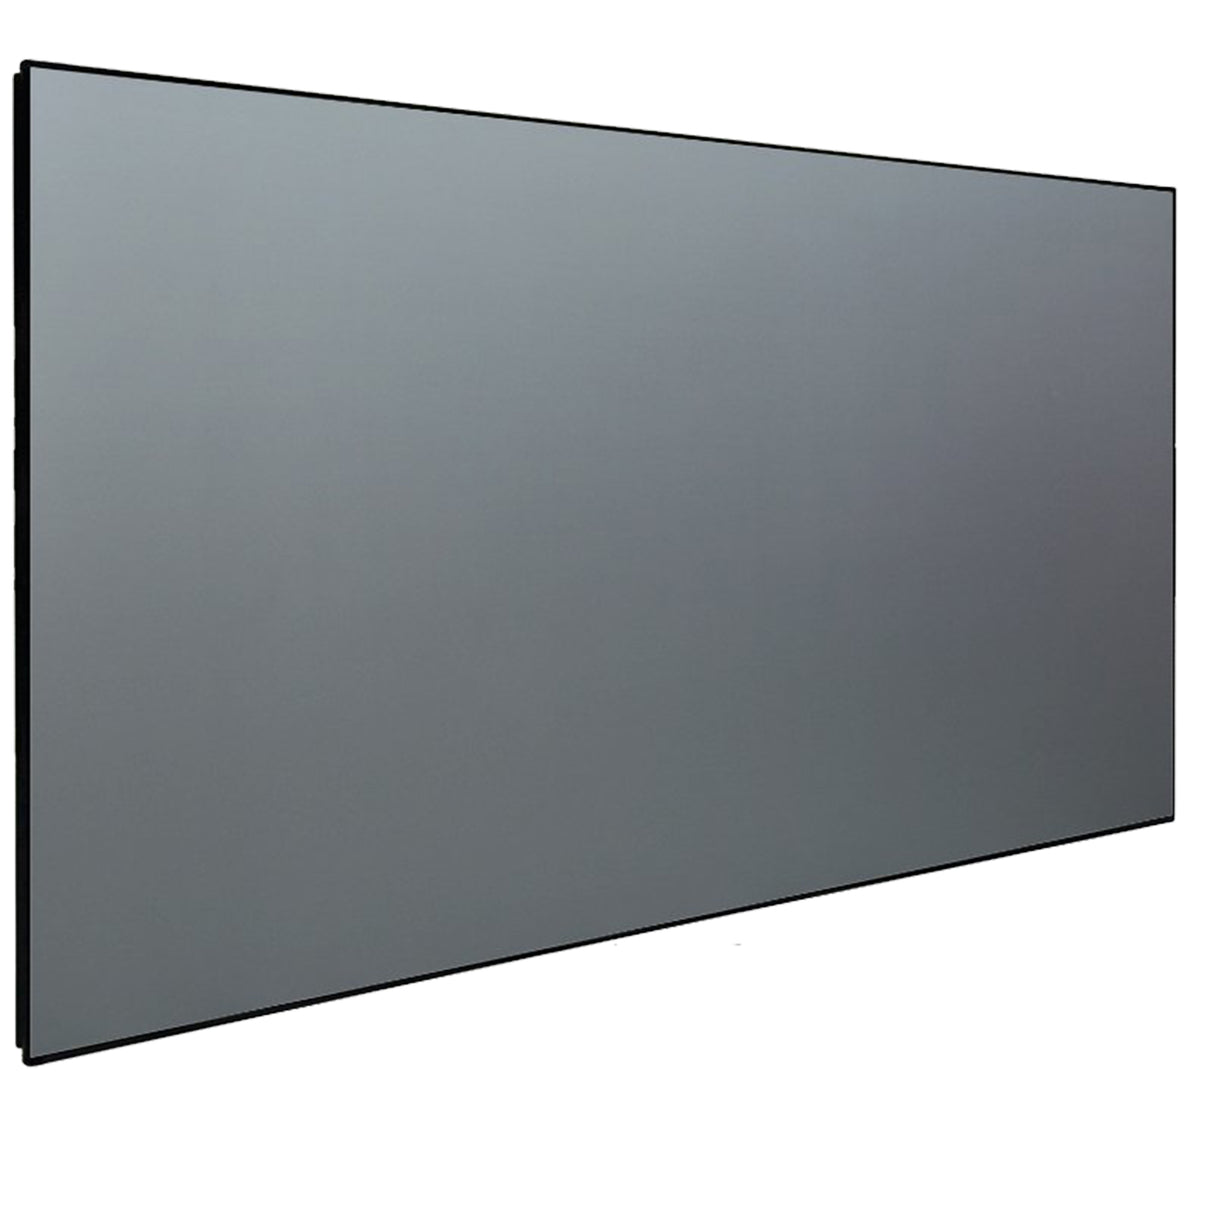 Prime Edgeless Grey Fabric Ambient Light Rejection (ALR) Flat Fixed Frame Projection Screen 120" (For Long Throw Projectors)